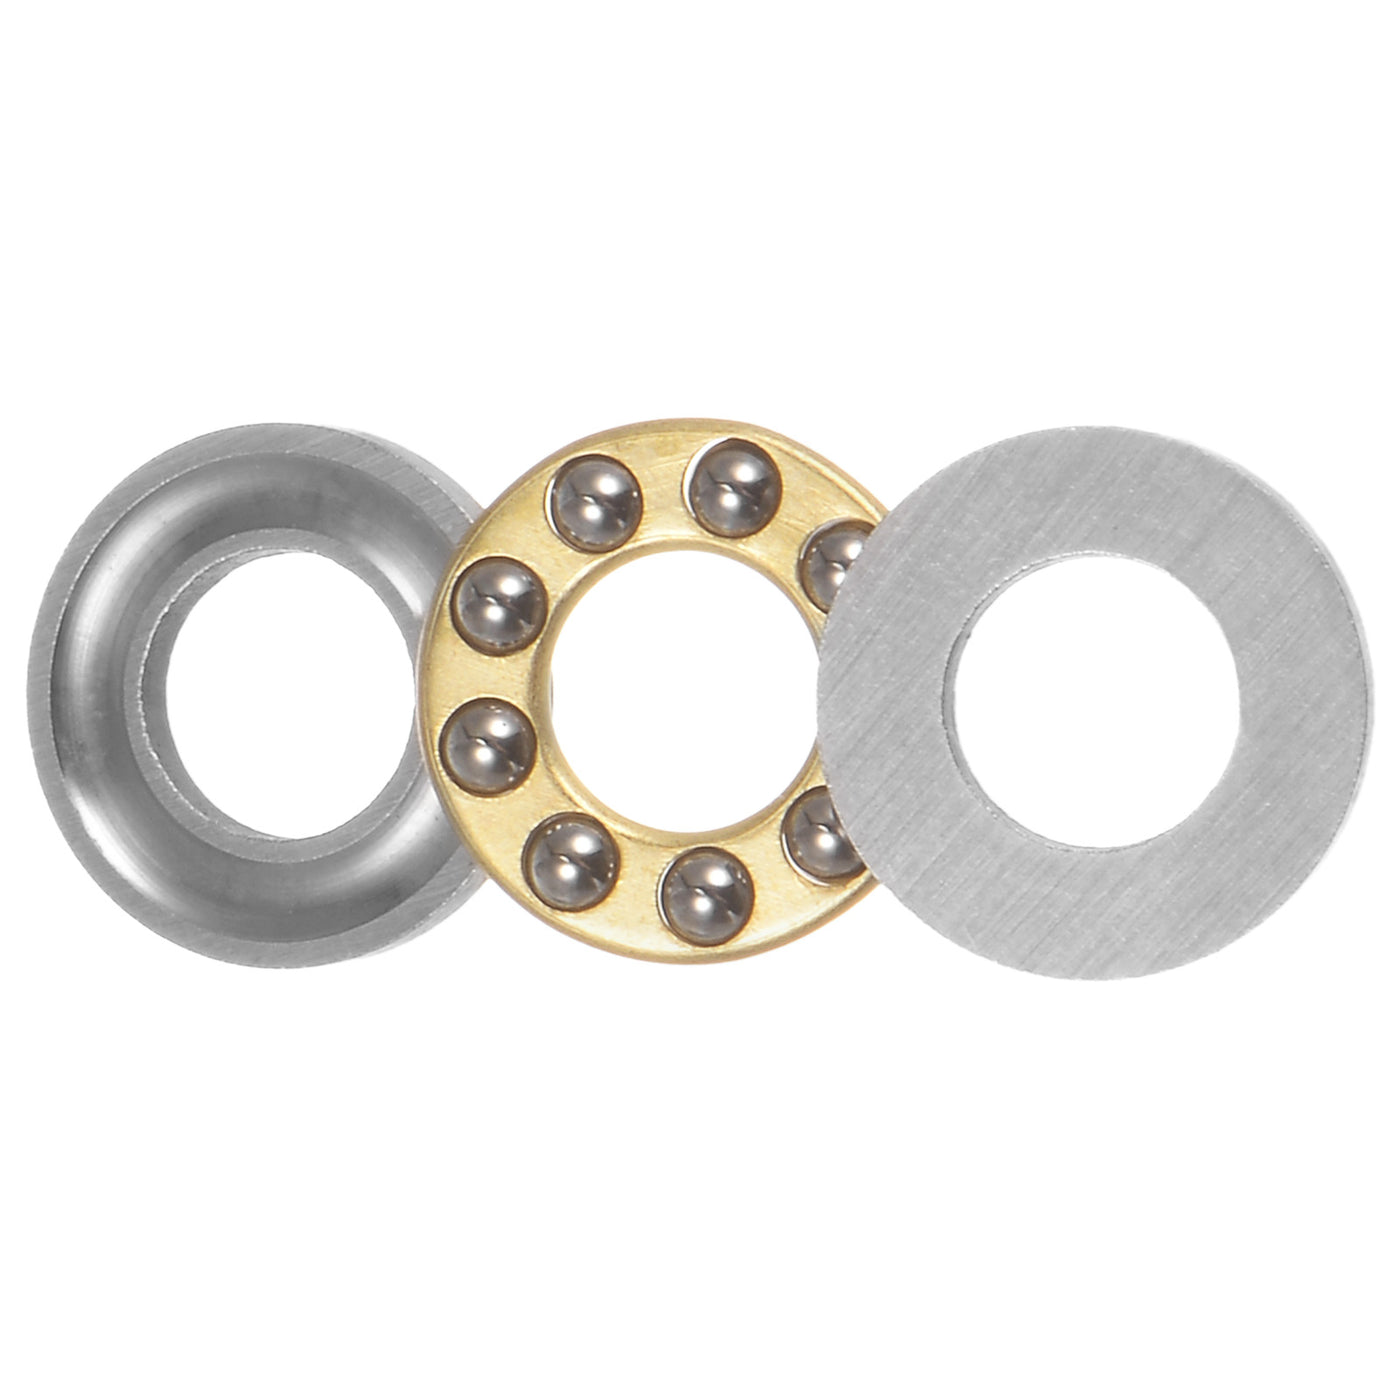 uxcell Uxcell F6-12M Thrust Ball Bearing 6x12x4.5mm Brass with Washers ABEC3 1pcs